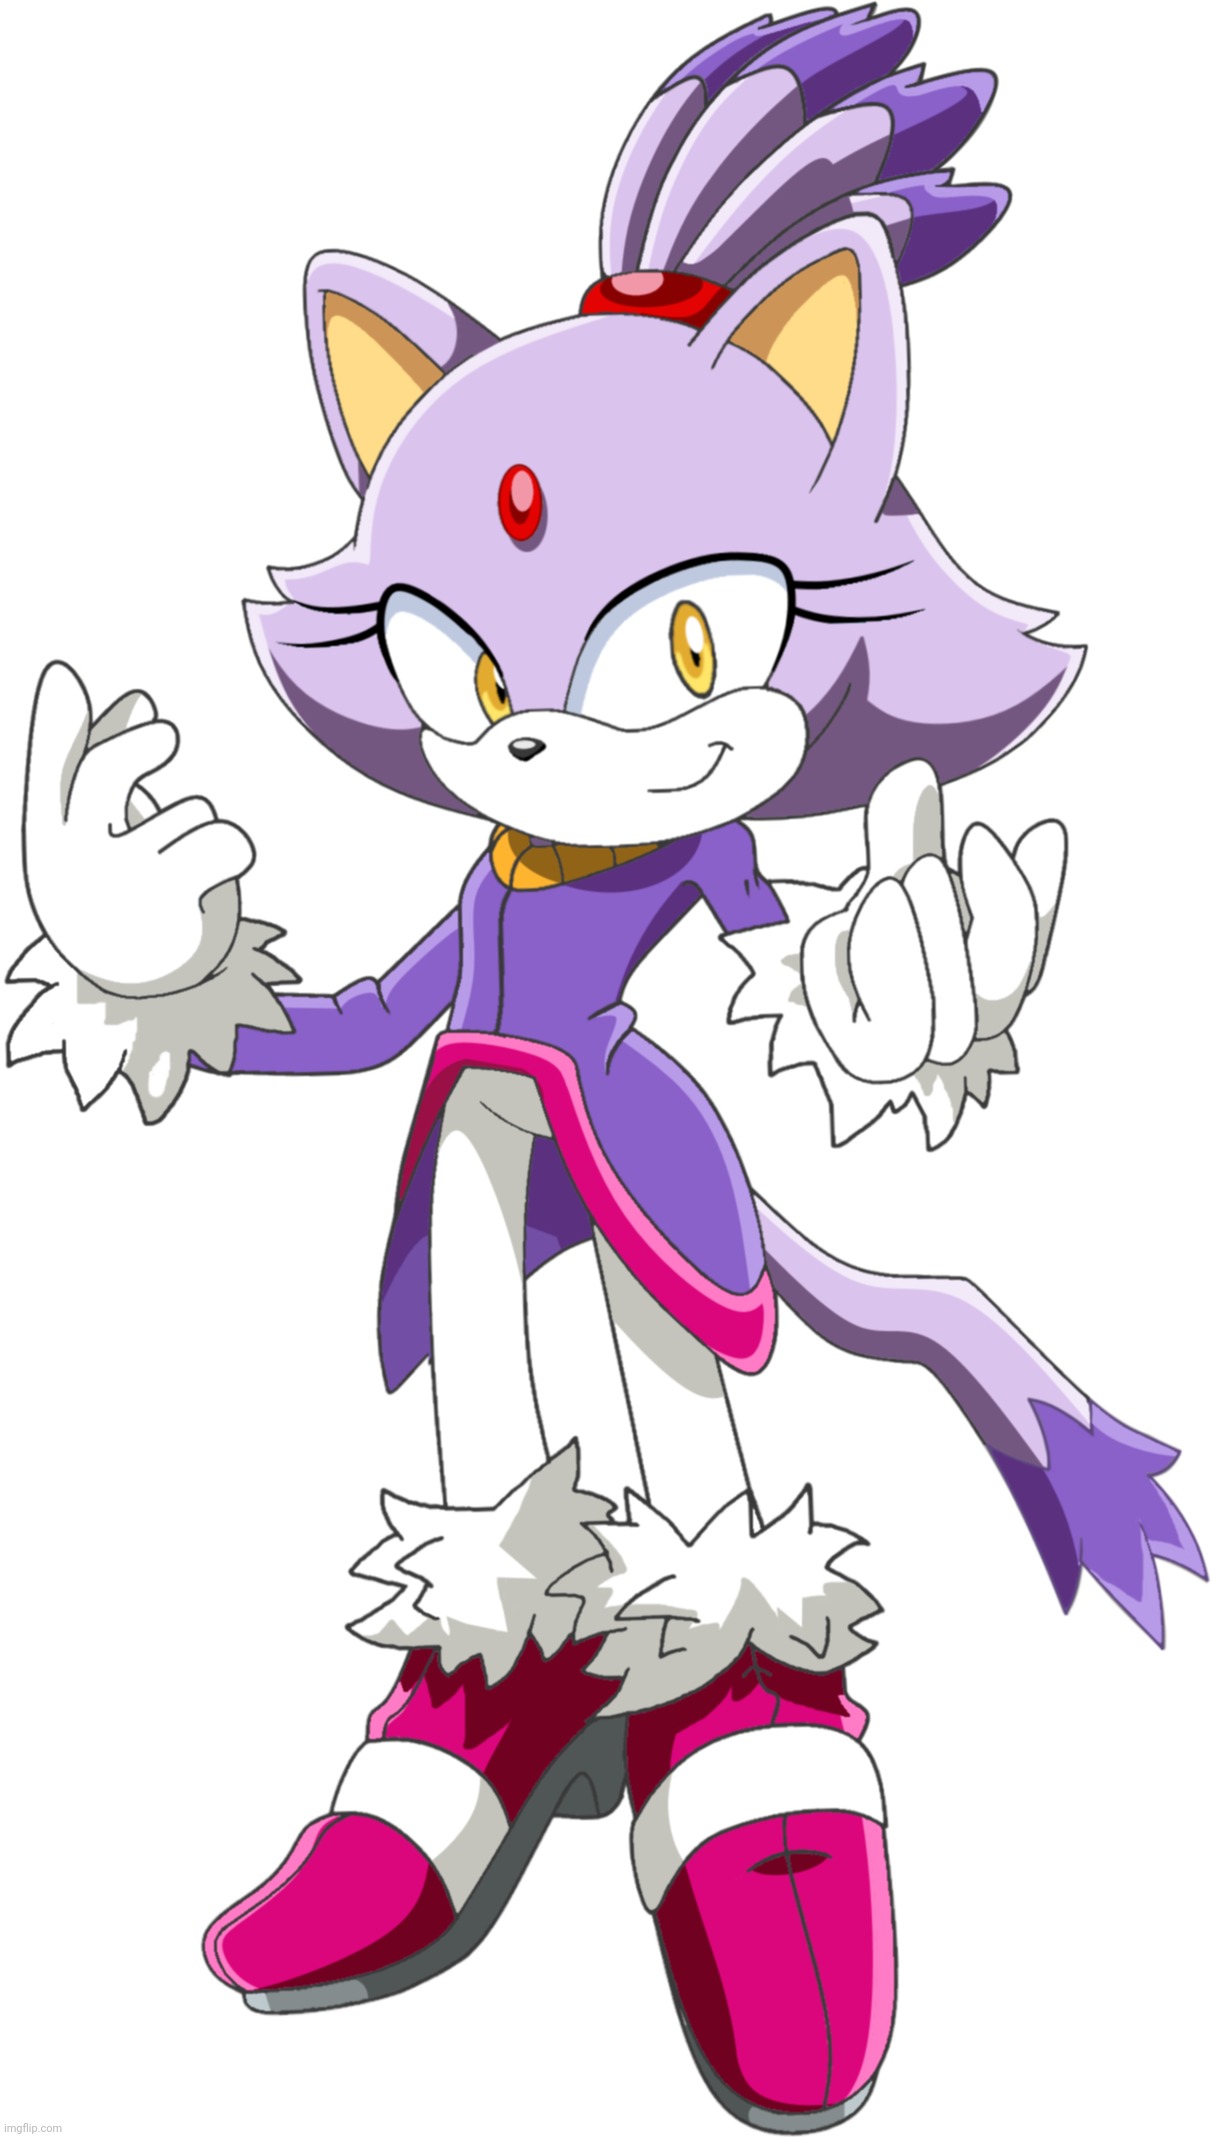 Nobody is going to stop me from posting blaze | image tagged in blaze the cat | made w/ Imgflip meme maker